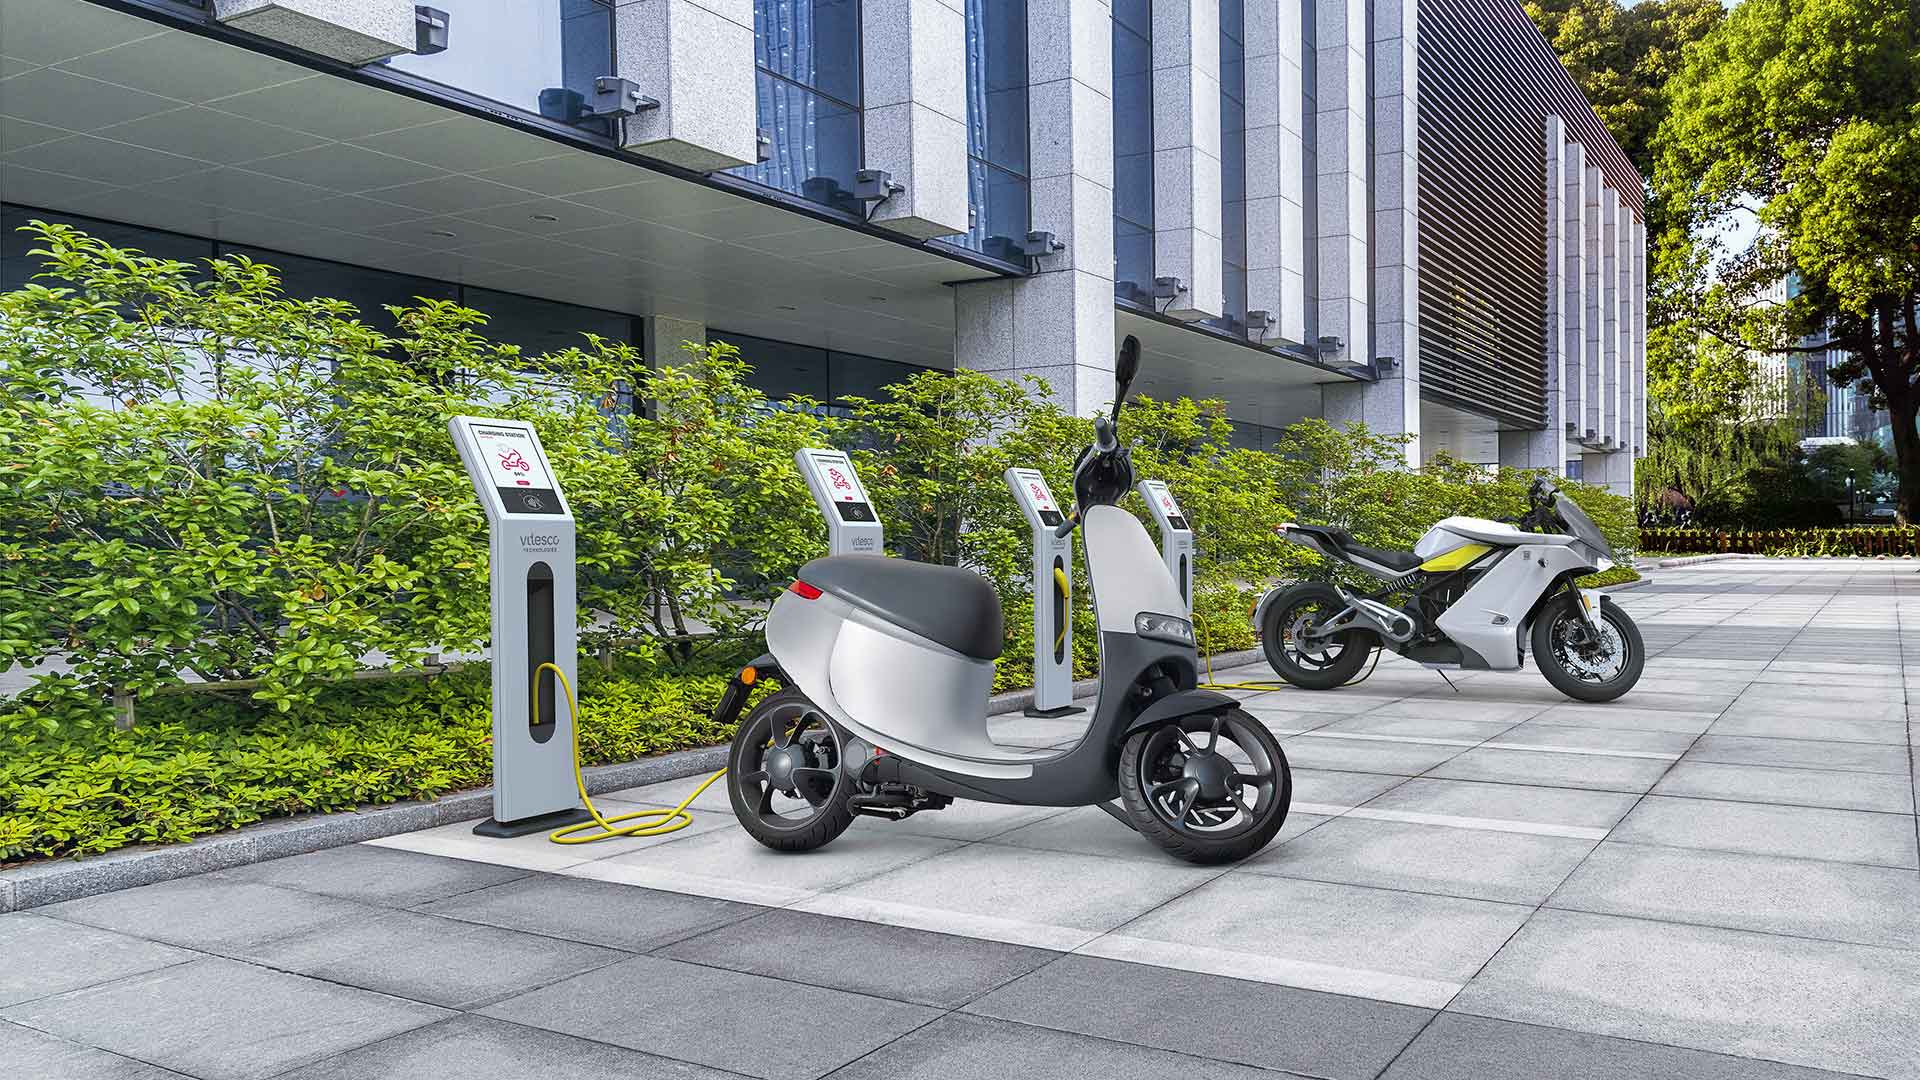 Vitesco Technologies presents a wide range of innovative electrification solutions at EICMA 2022